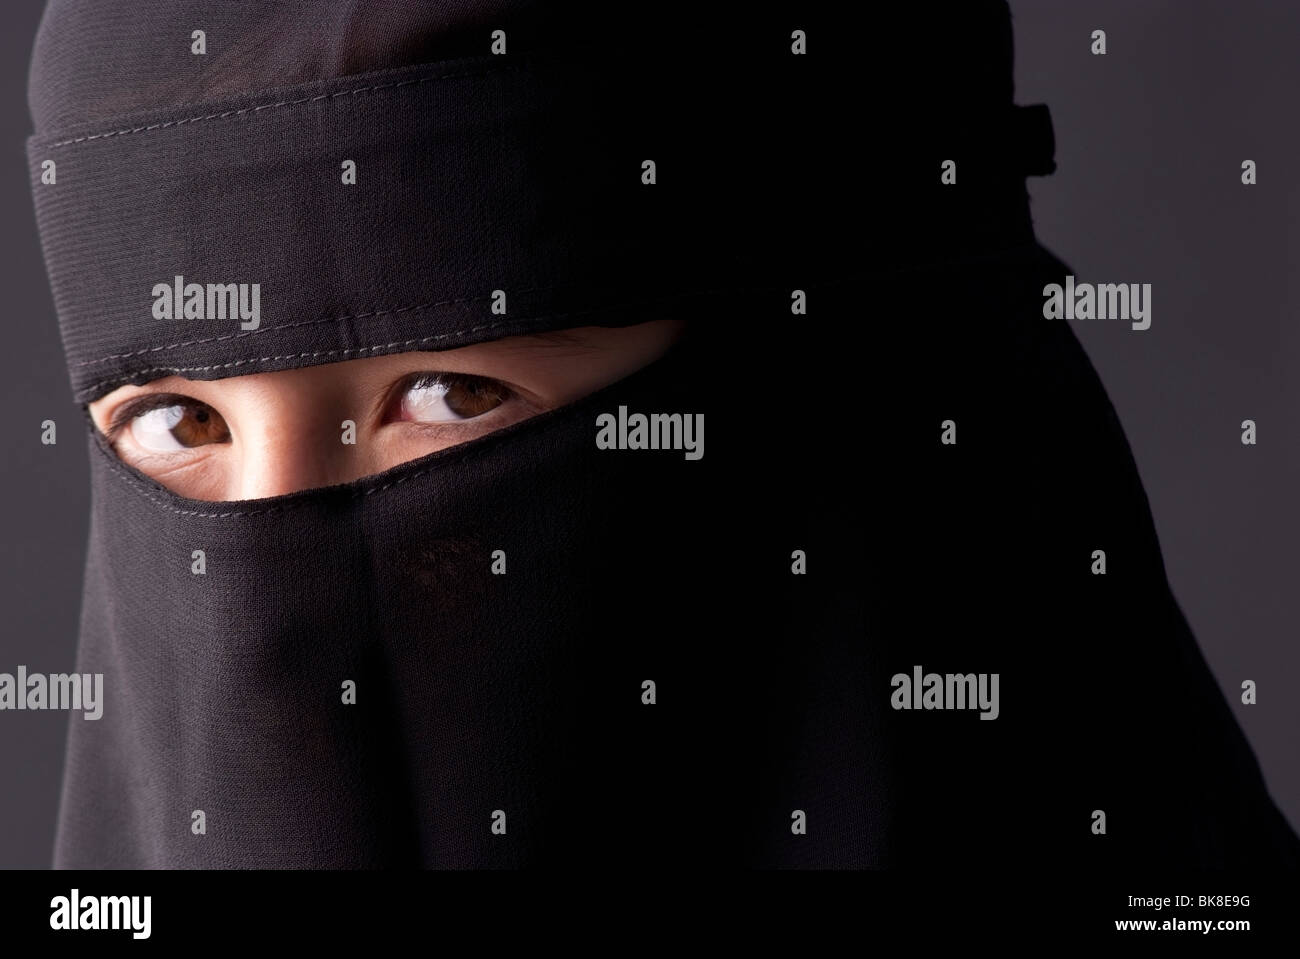 Teenage girl wearing a traditional Muslim niqab, a head covering with a veil that covers the face. Stock Photo